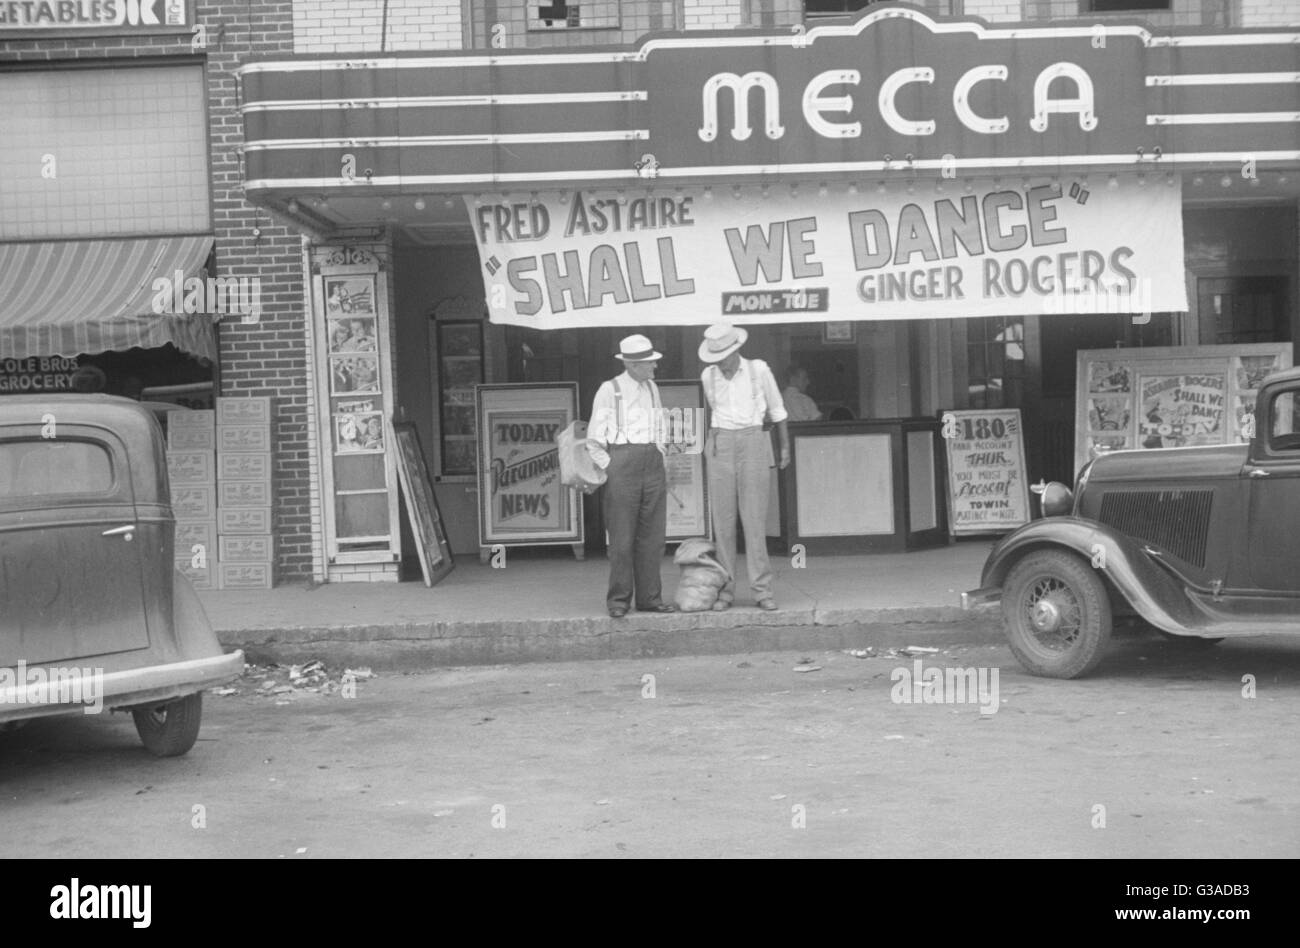 1930s Mecca Cinema in America showing Shall We Dance     Date: C. late 1930s Stock Photo